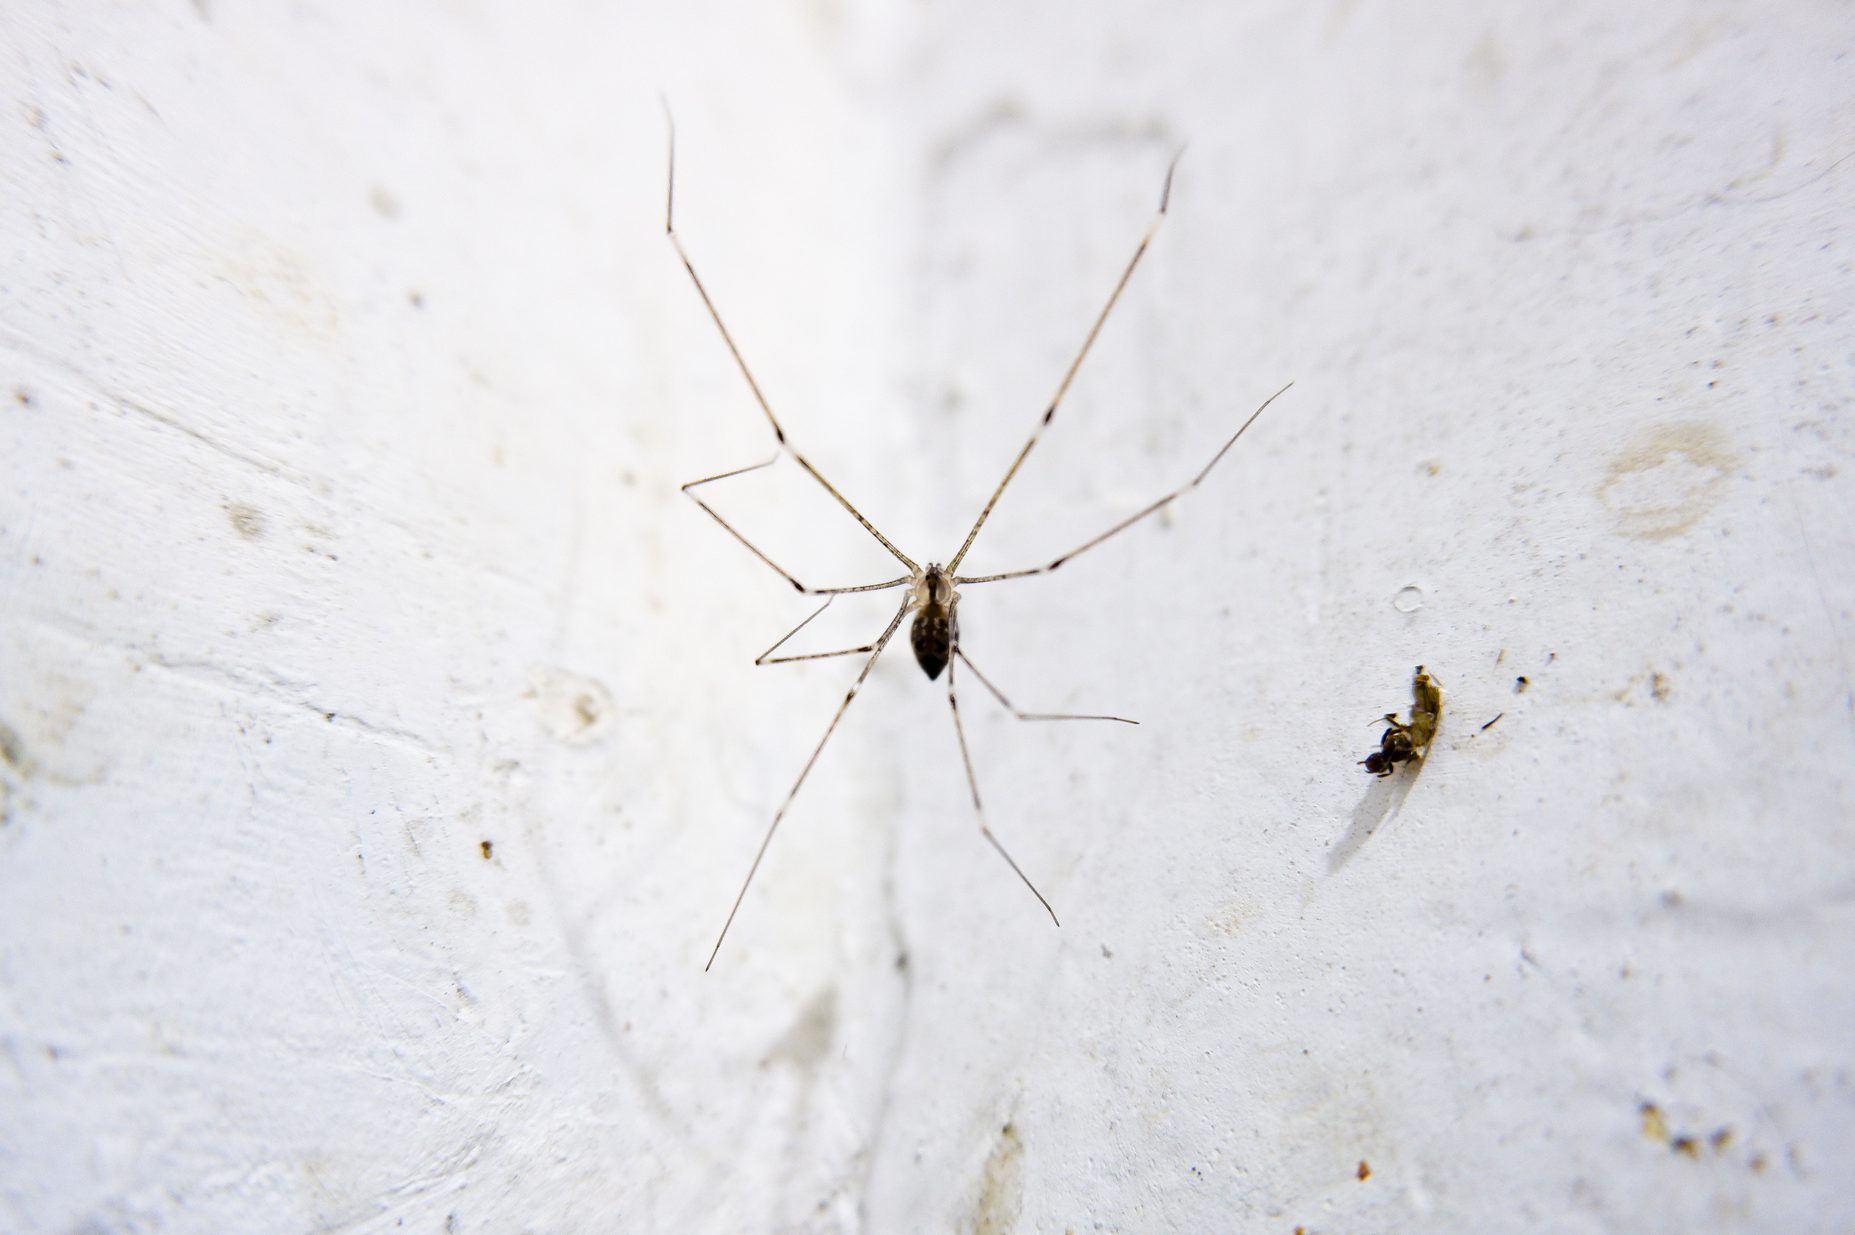 Spiders in Your Basement? Here's How to Get Rid of Them and Keep Them Out